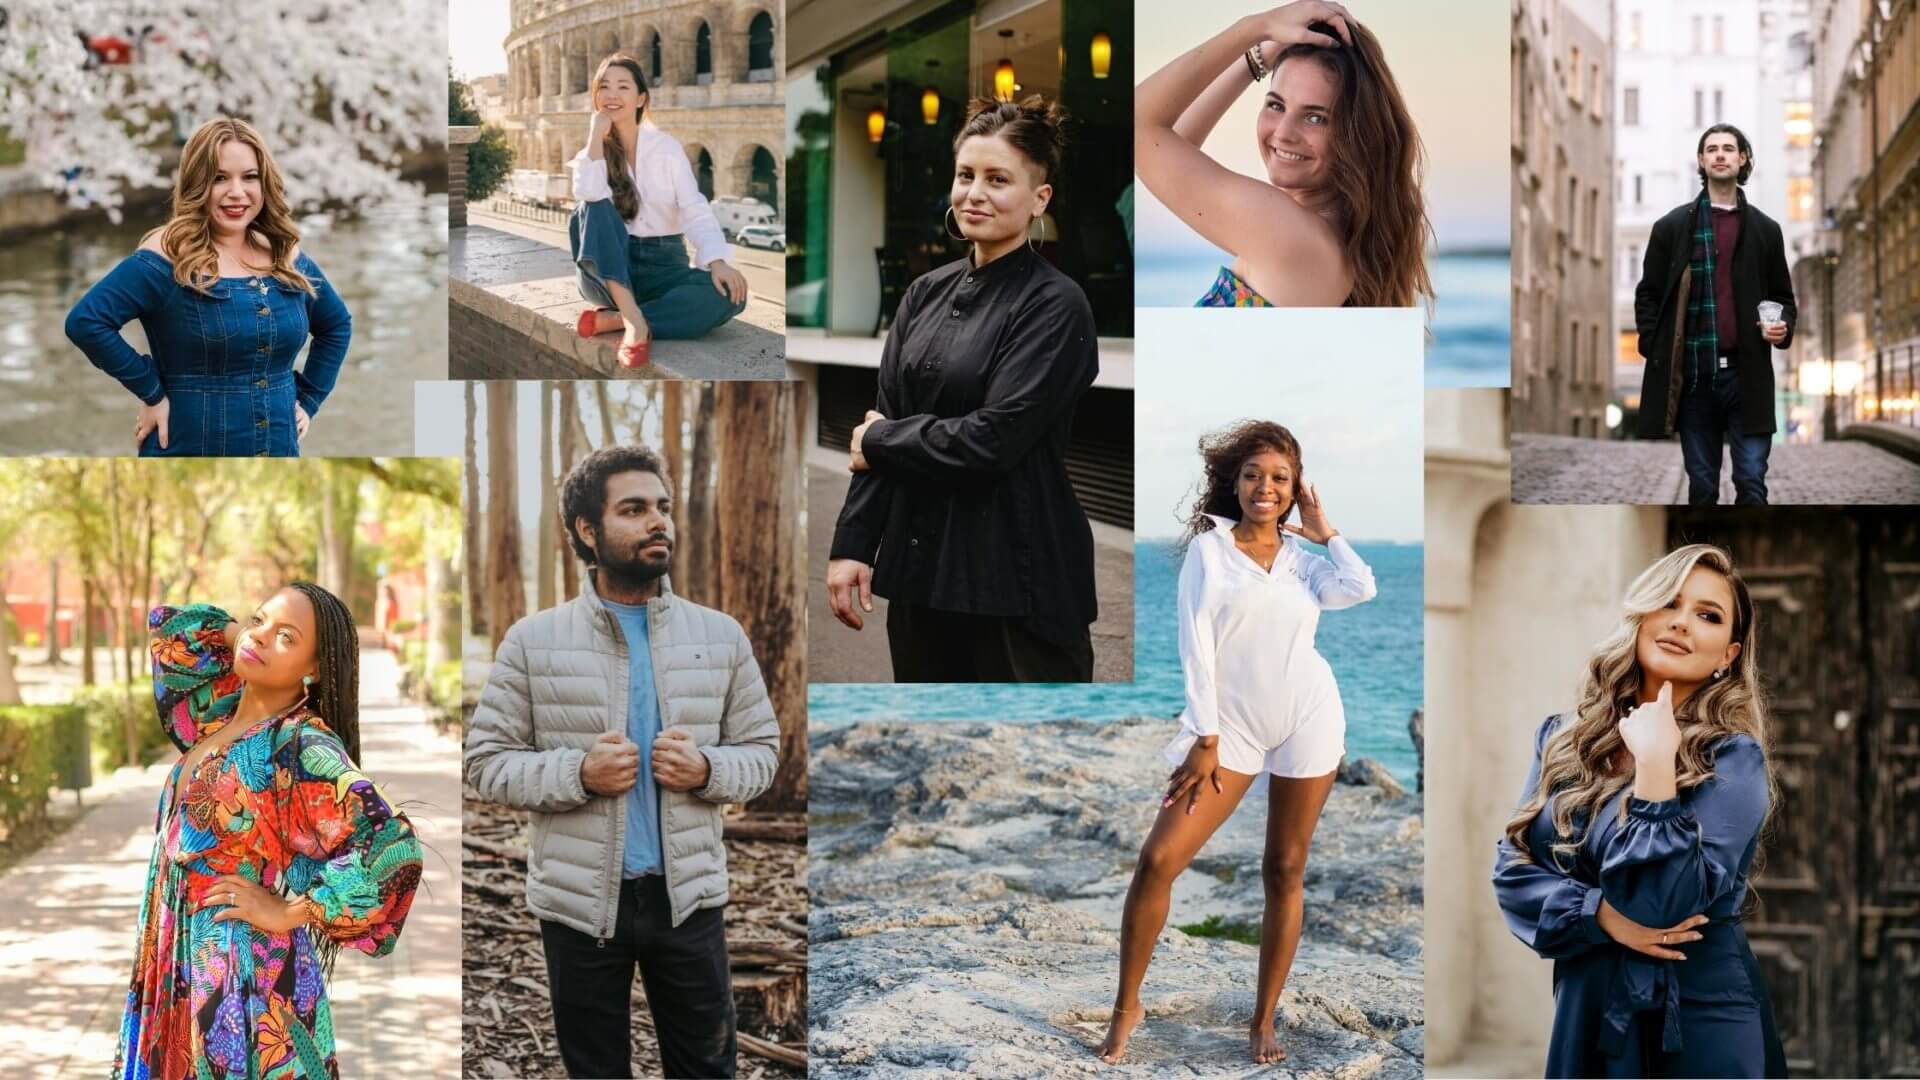 How to Pose for Vacation Photos: Simple Photoshoot Poses for Men